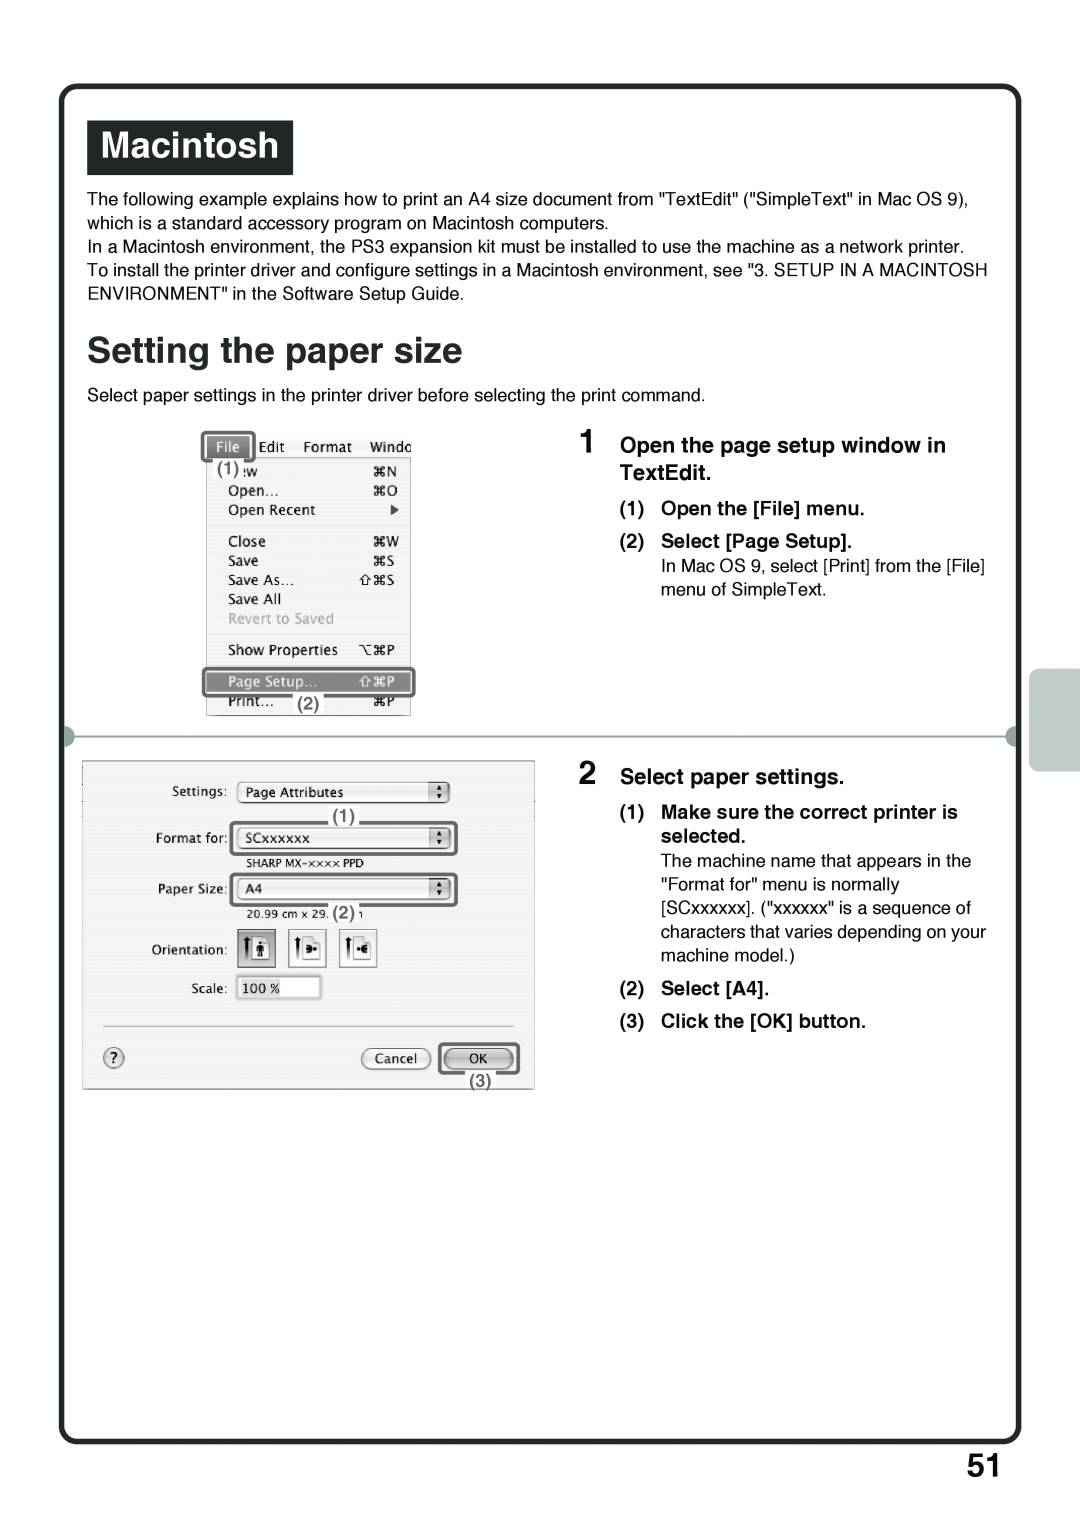 Sharp MX-5000N Macintosh, Setting the paper size, Open the page setup window in, TextEdit, Select paper settings, selected 